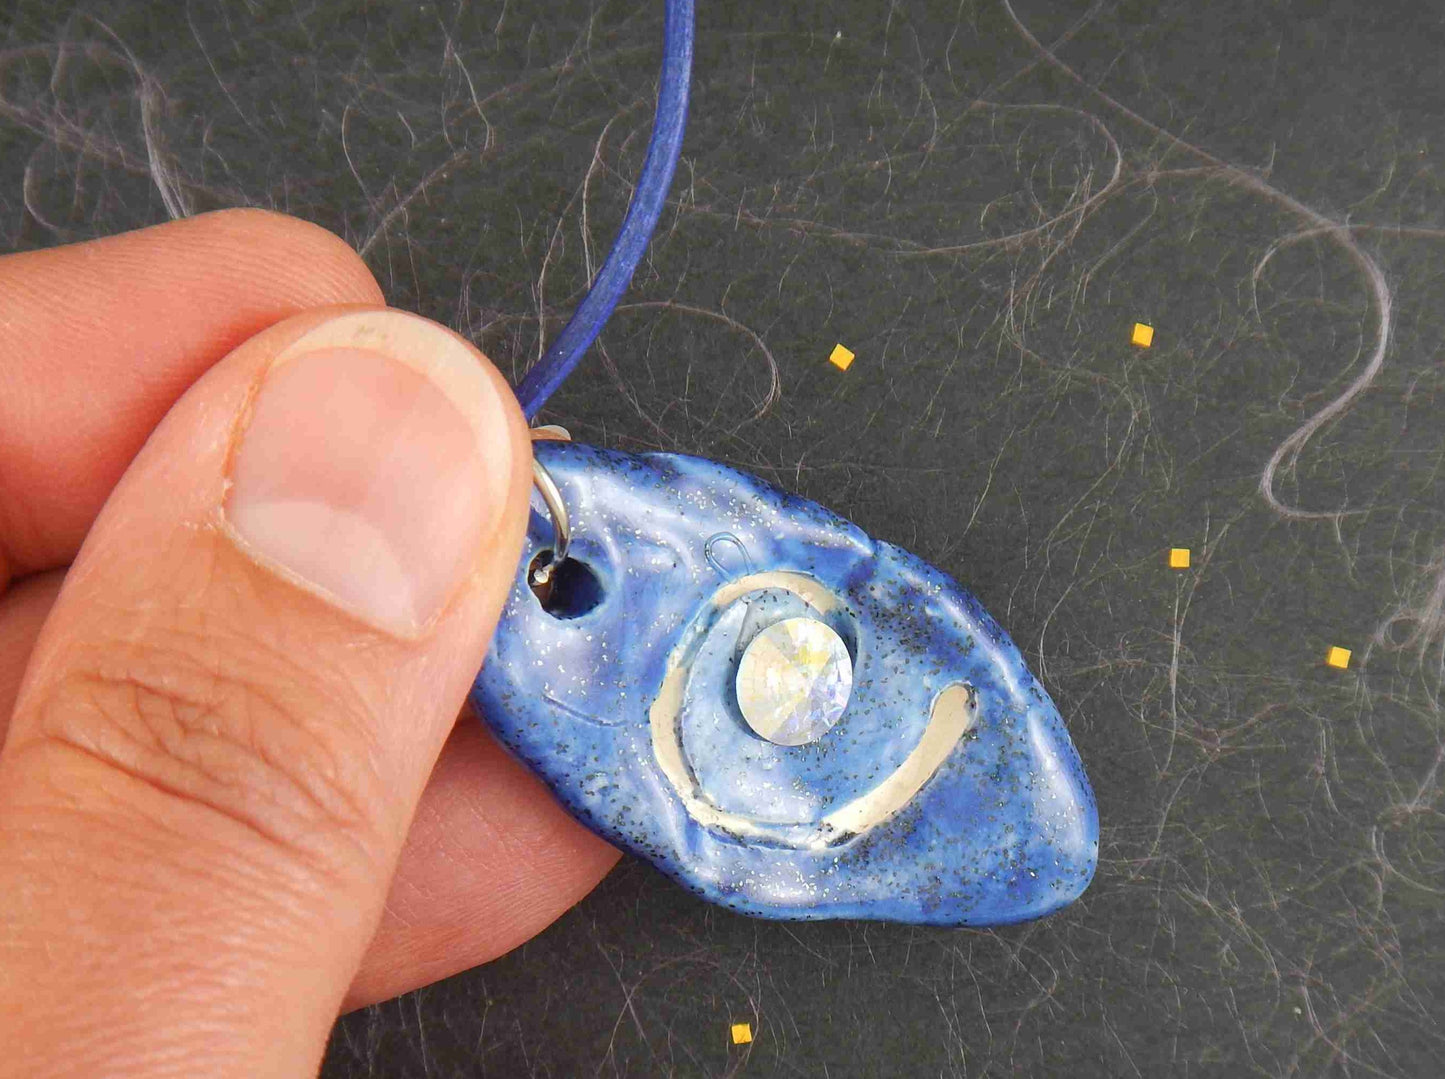 18-inch necklace with jean blue spiralled shell-like pendant handmade in Montreal, 6mm Crystal AB Swarovski Rivoli chaton, jean blue leather cord, stainless steel clasp